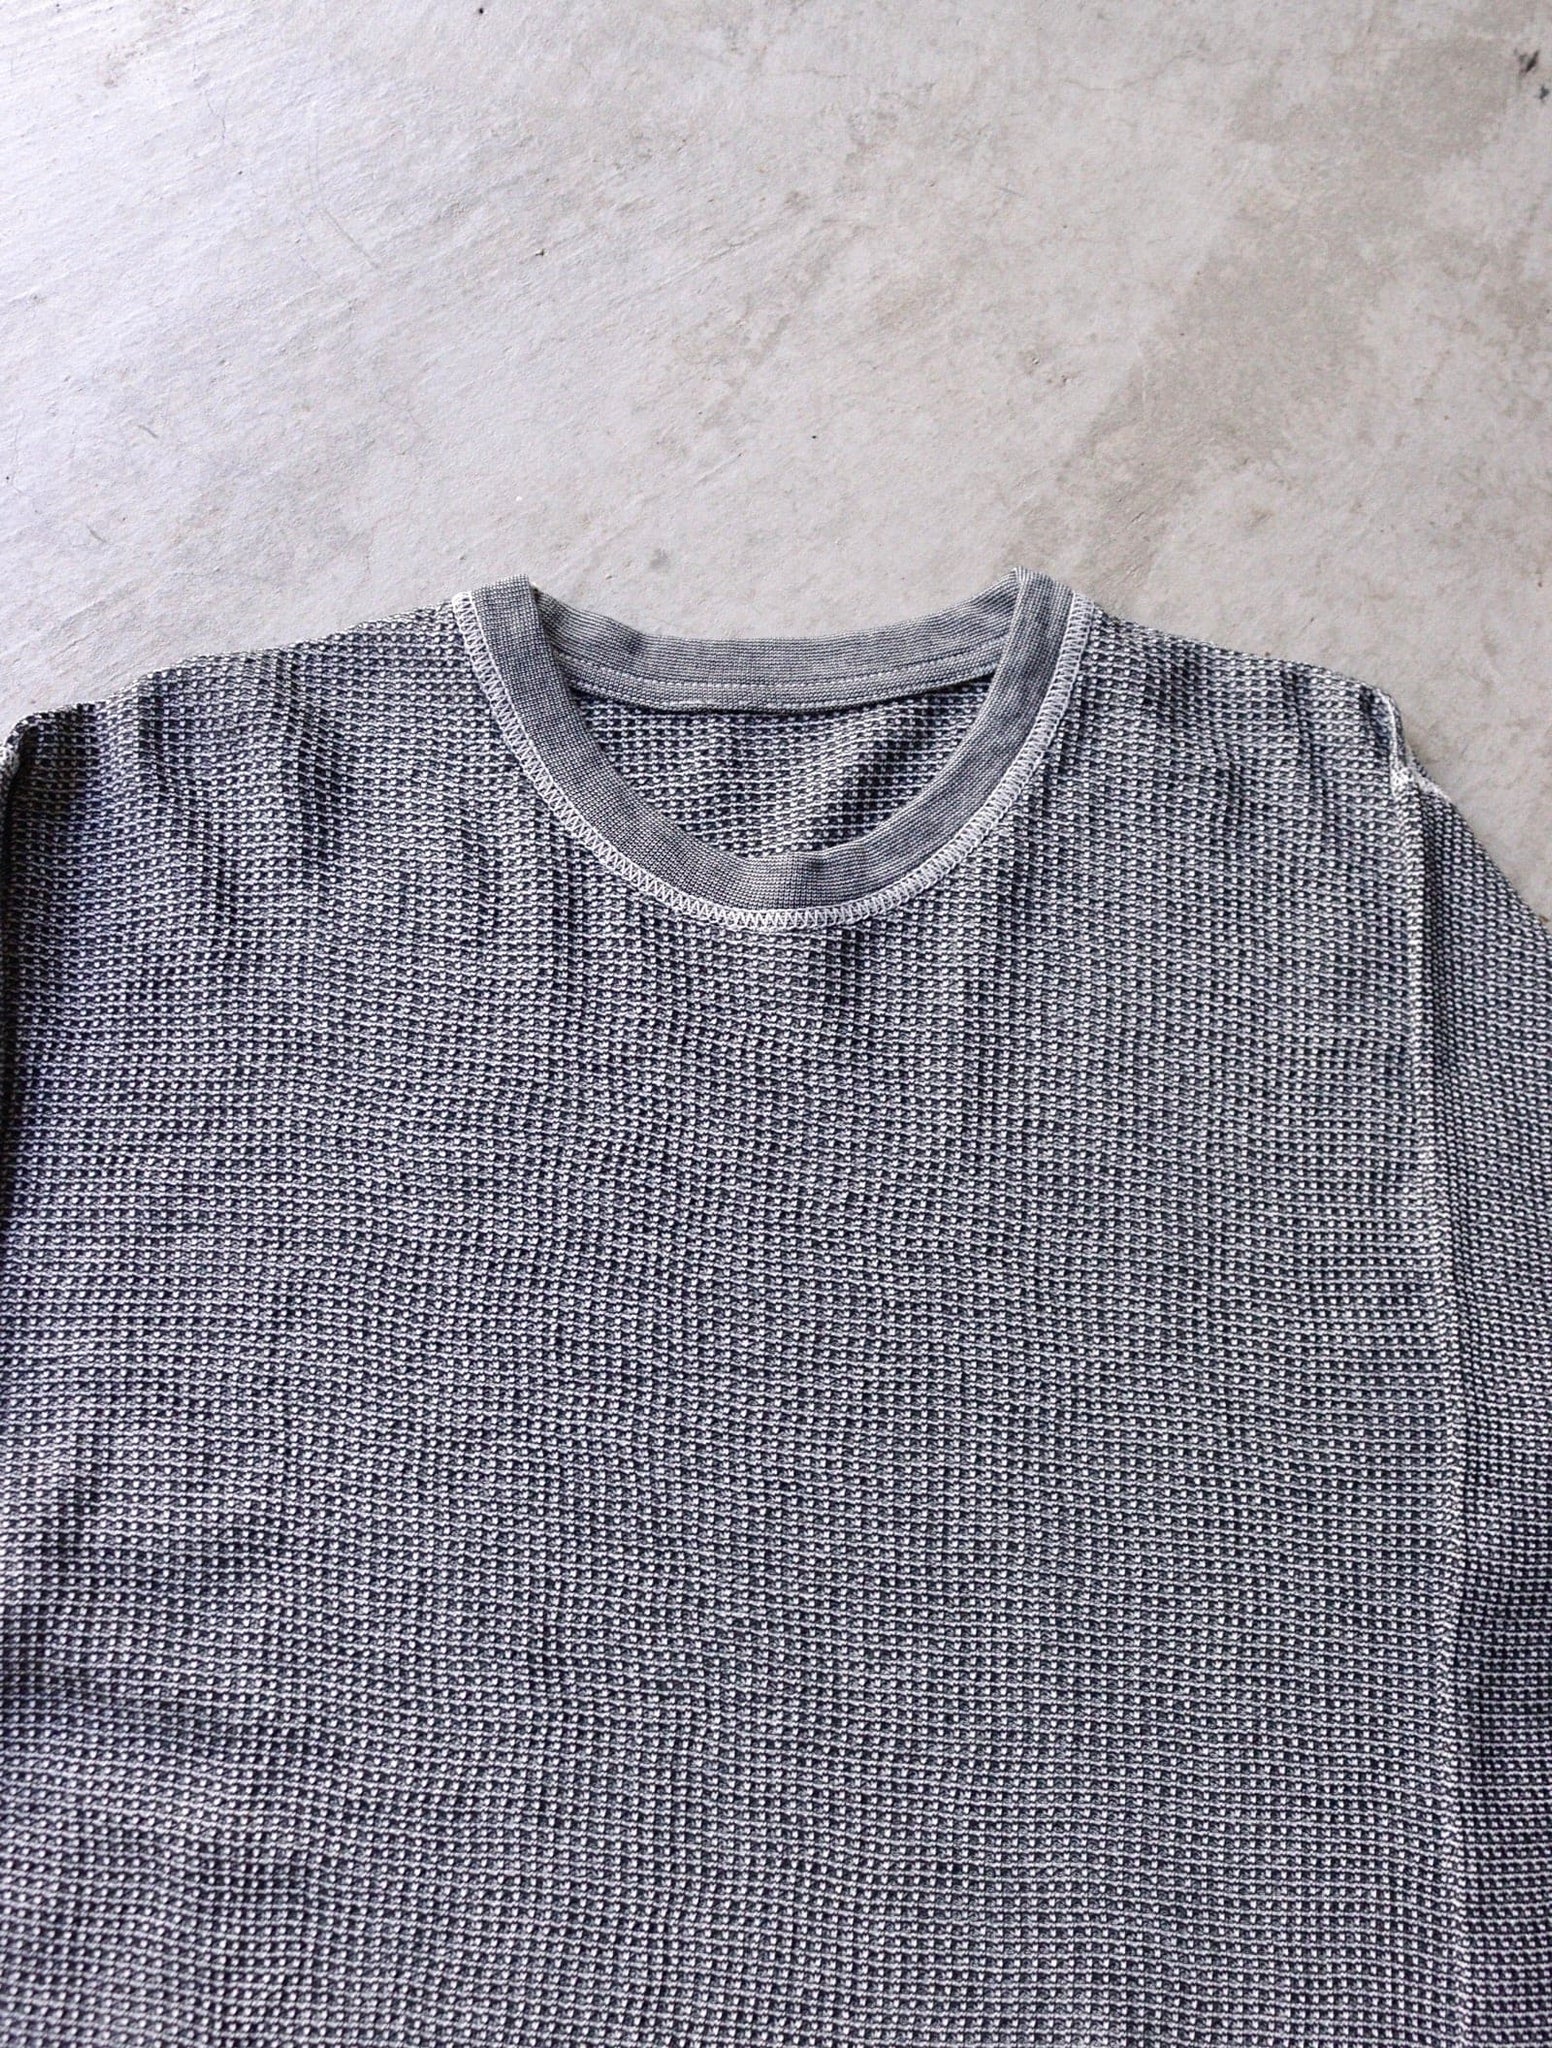 1990S CROPPED THERMAL L/S SHIRT